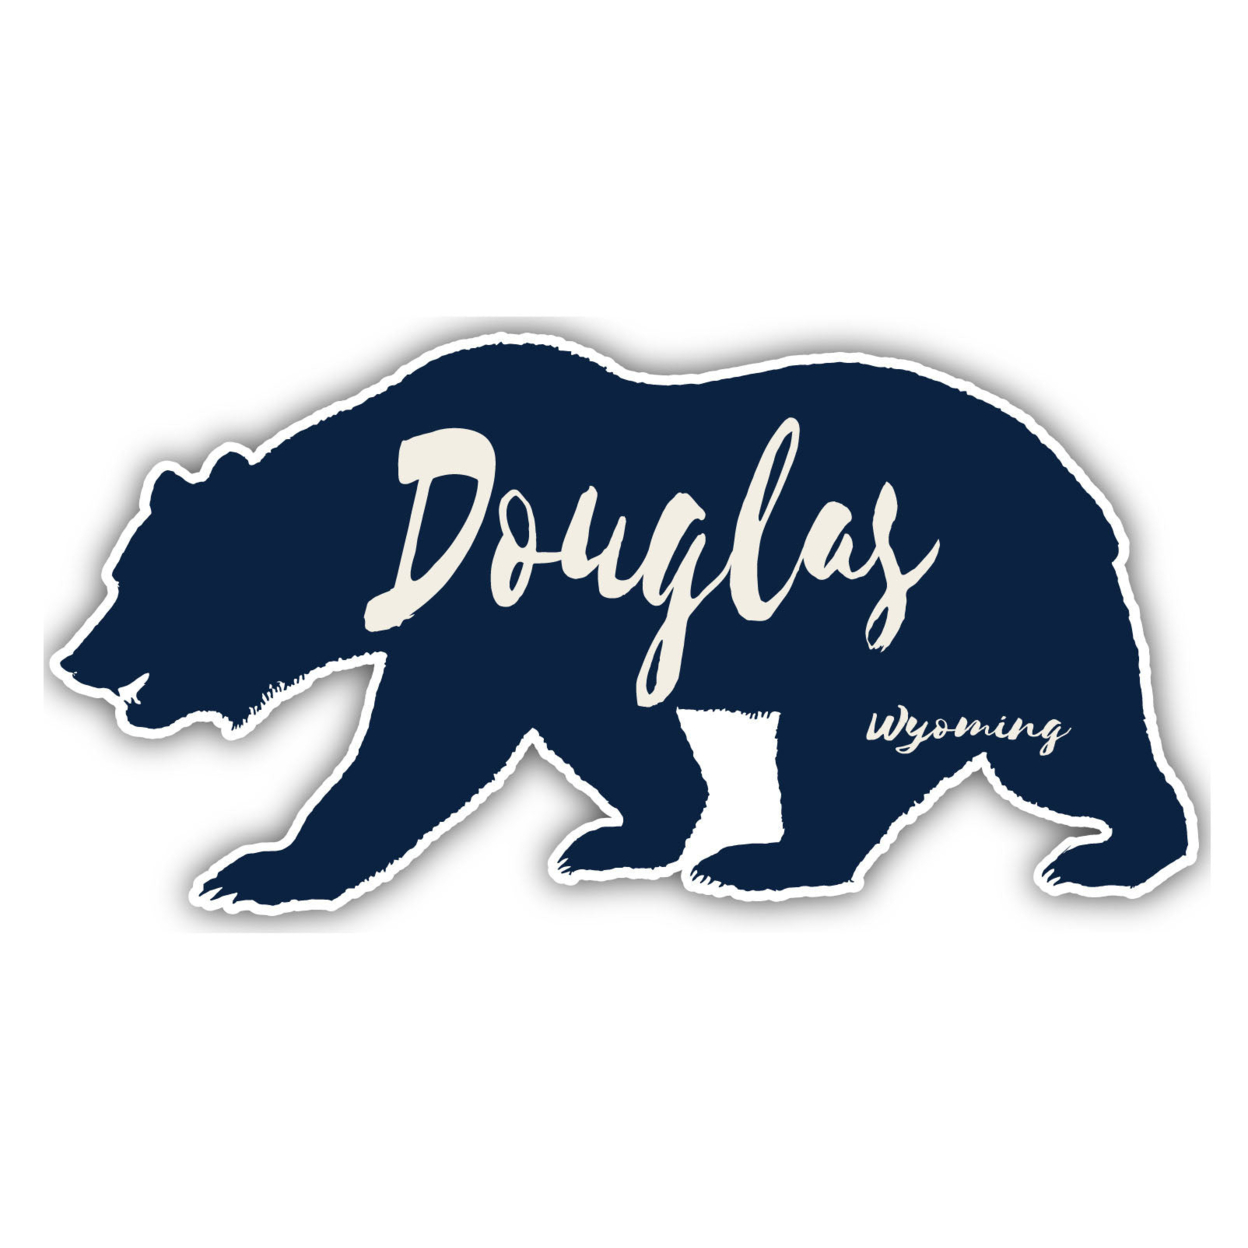 Douglas Wyoming Souvenir Decorative Stickers (Choose Theme And Size) - 4-Pack, 6-Inch, Bear